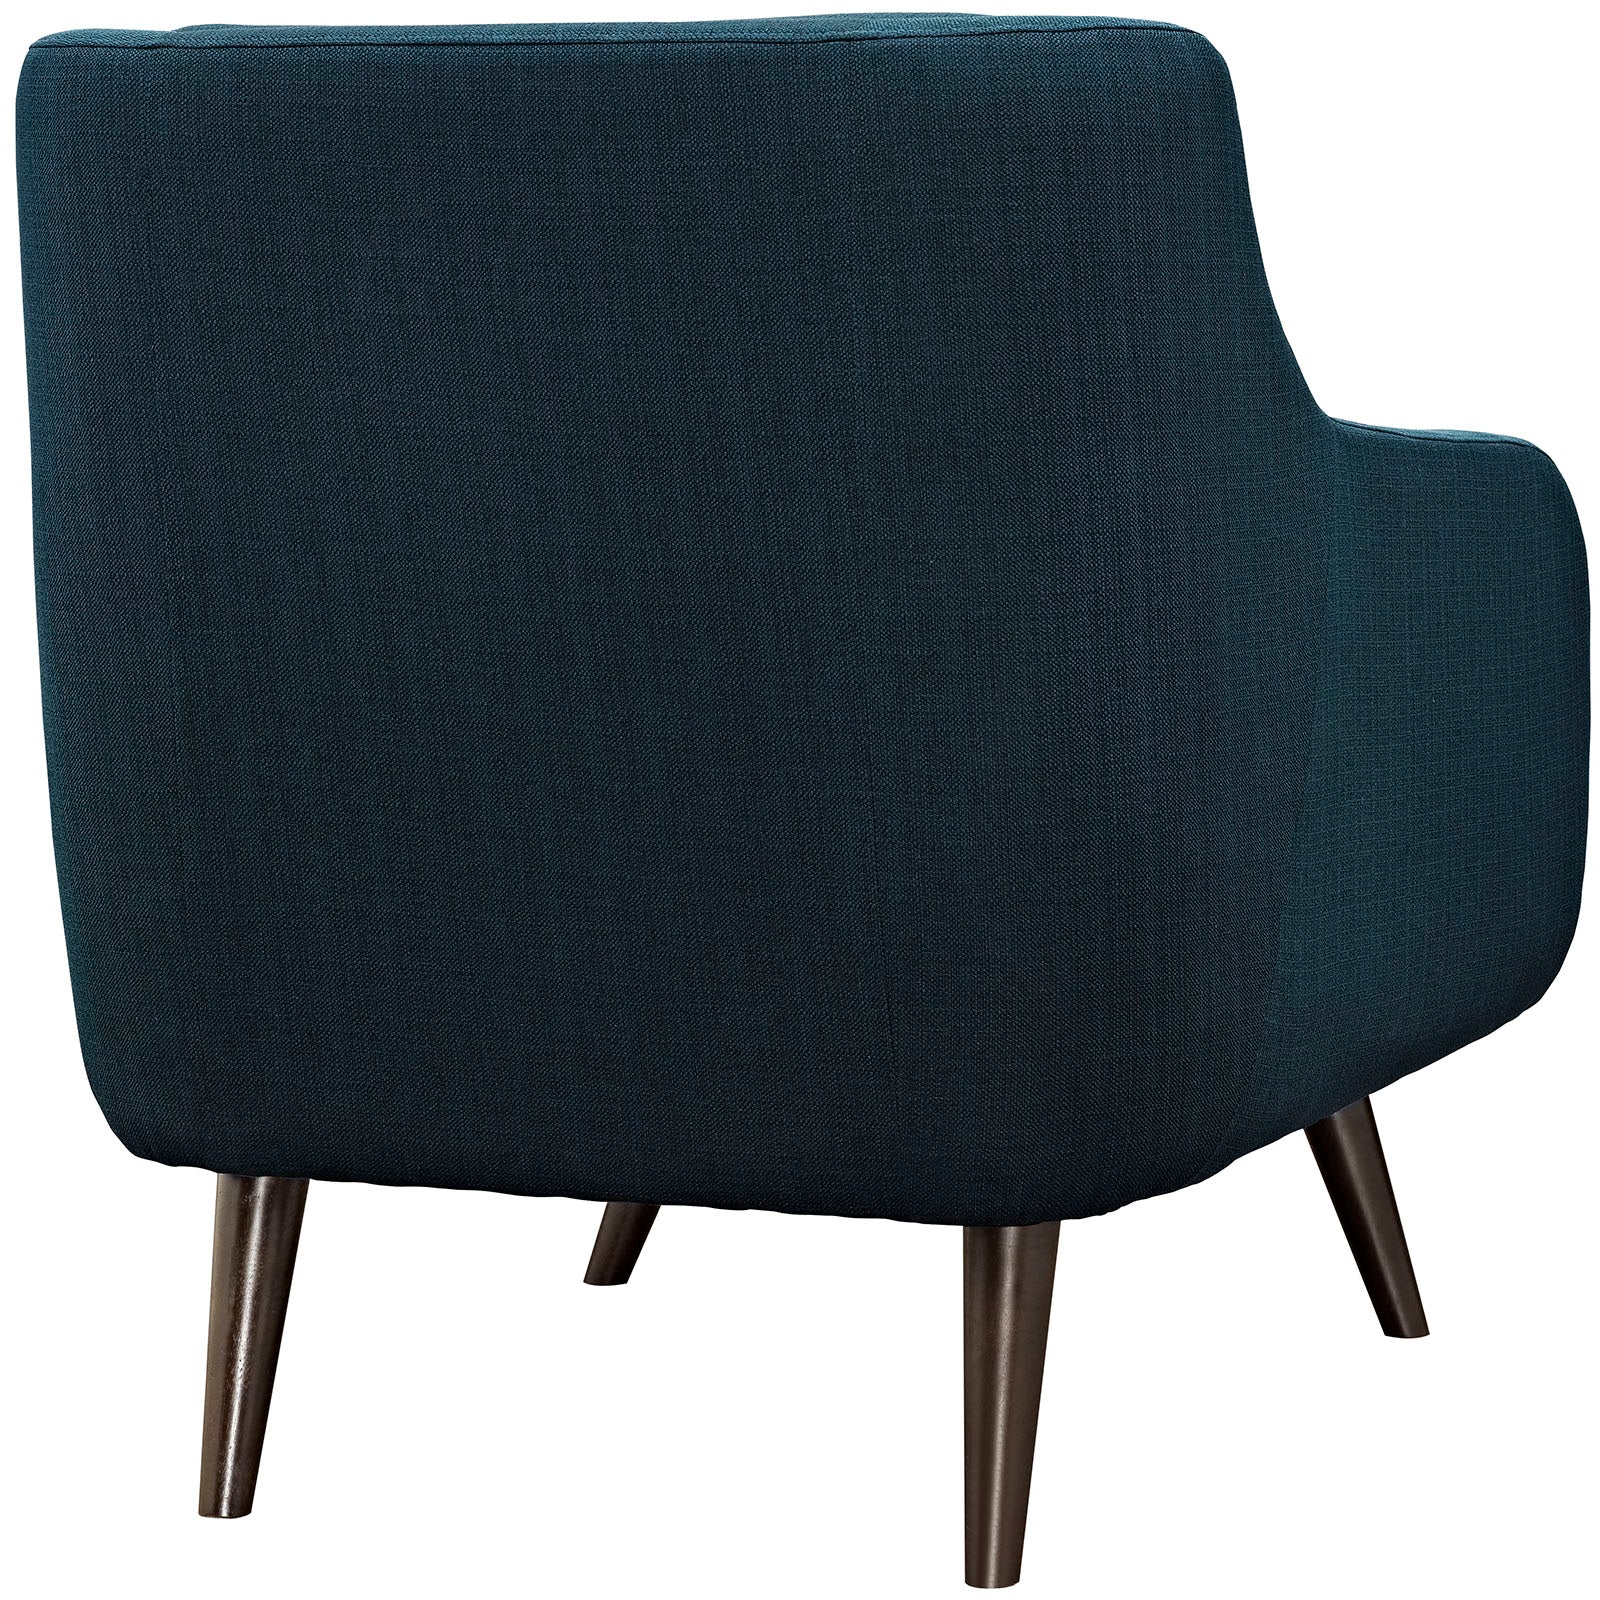 Verve Upholstered Fabric Armchair